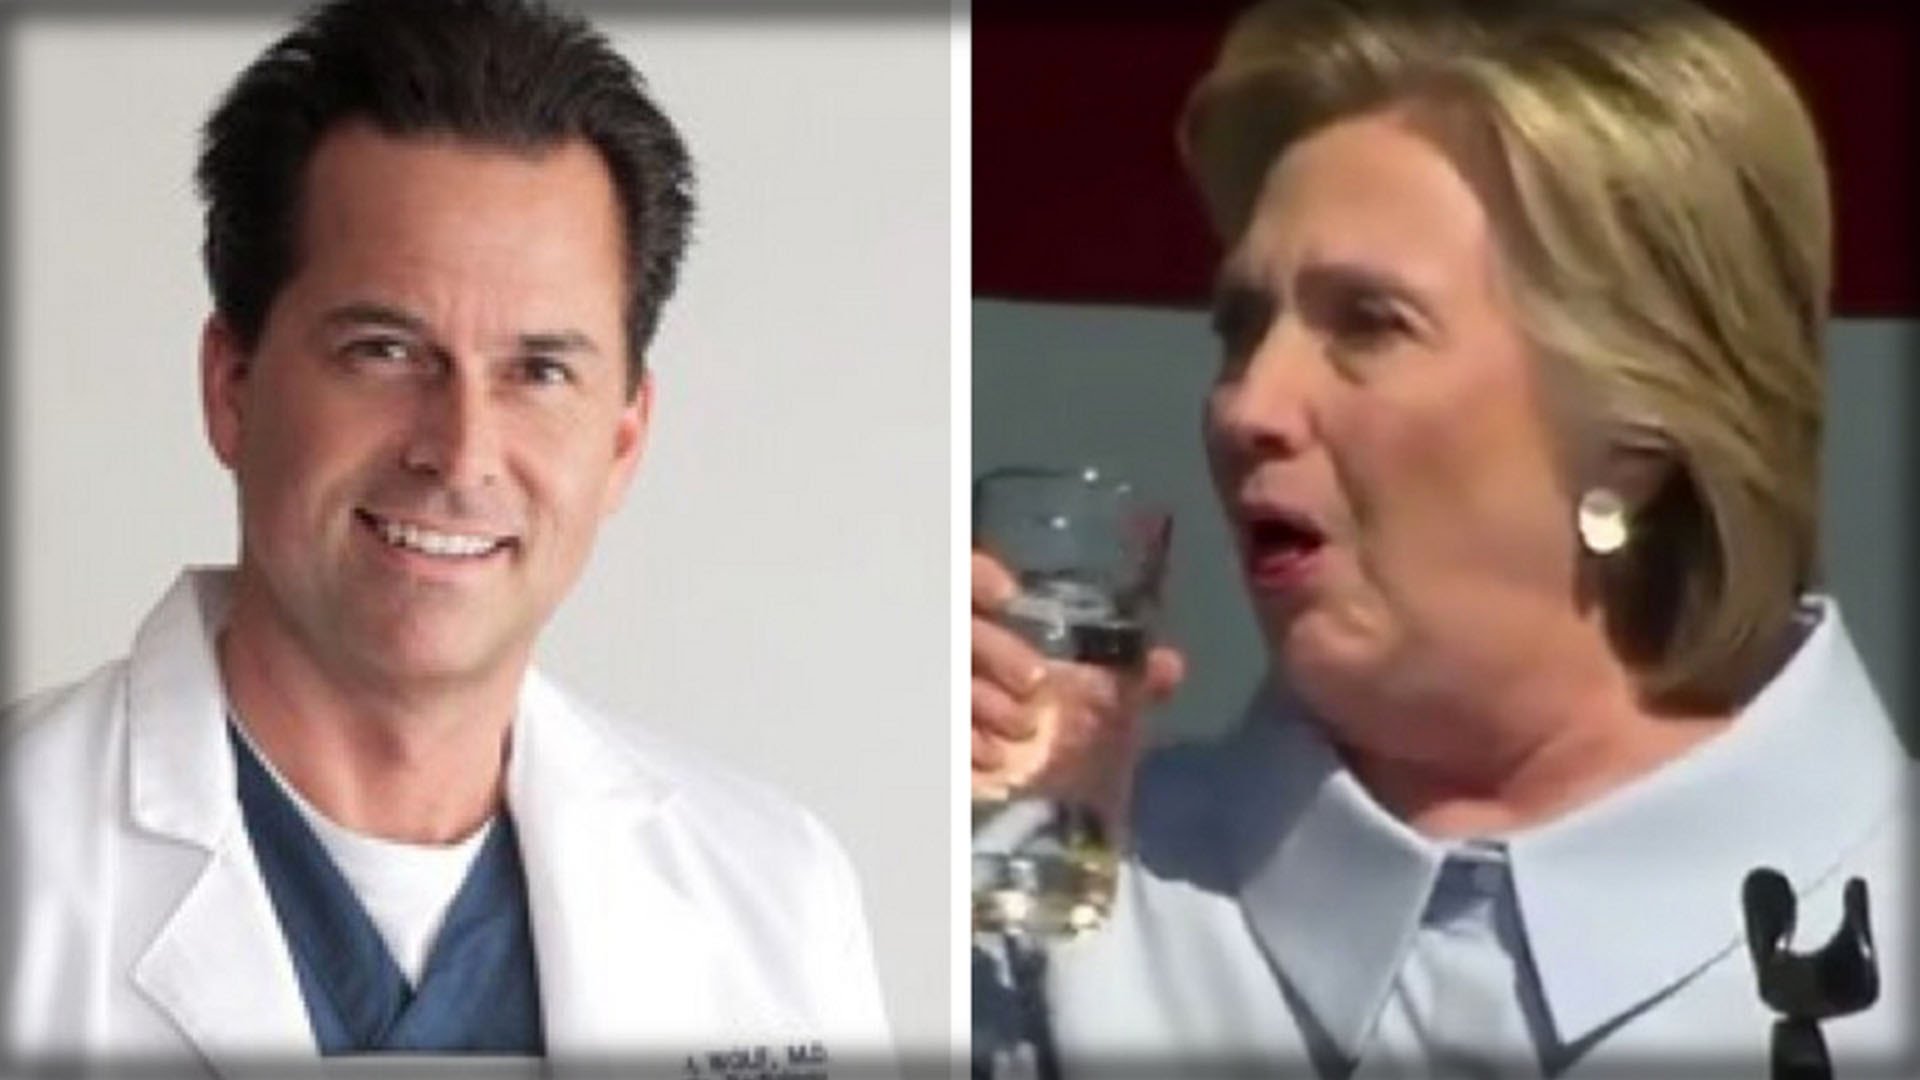 BREAKING: ANOTHER DOCTOR JUST DESTROYED HILLARY’S PHONEY HEALTH DIAGNOSIS